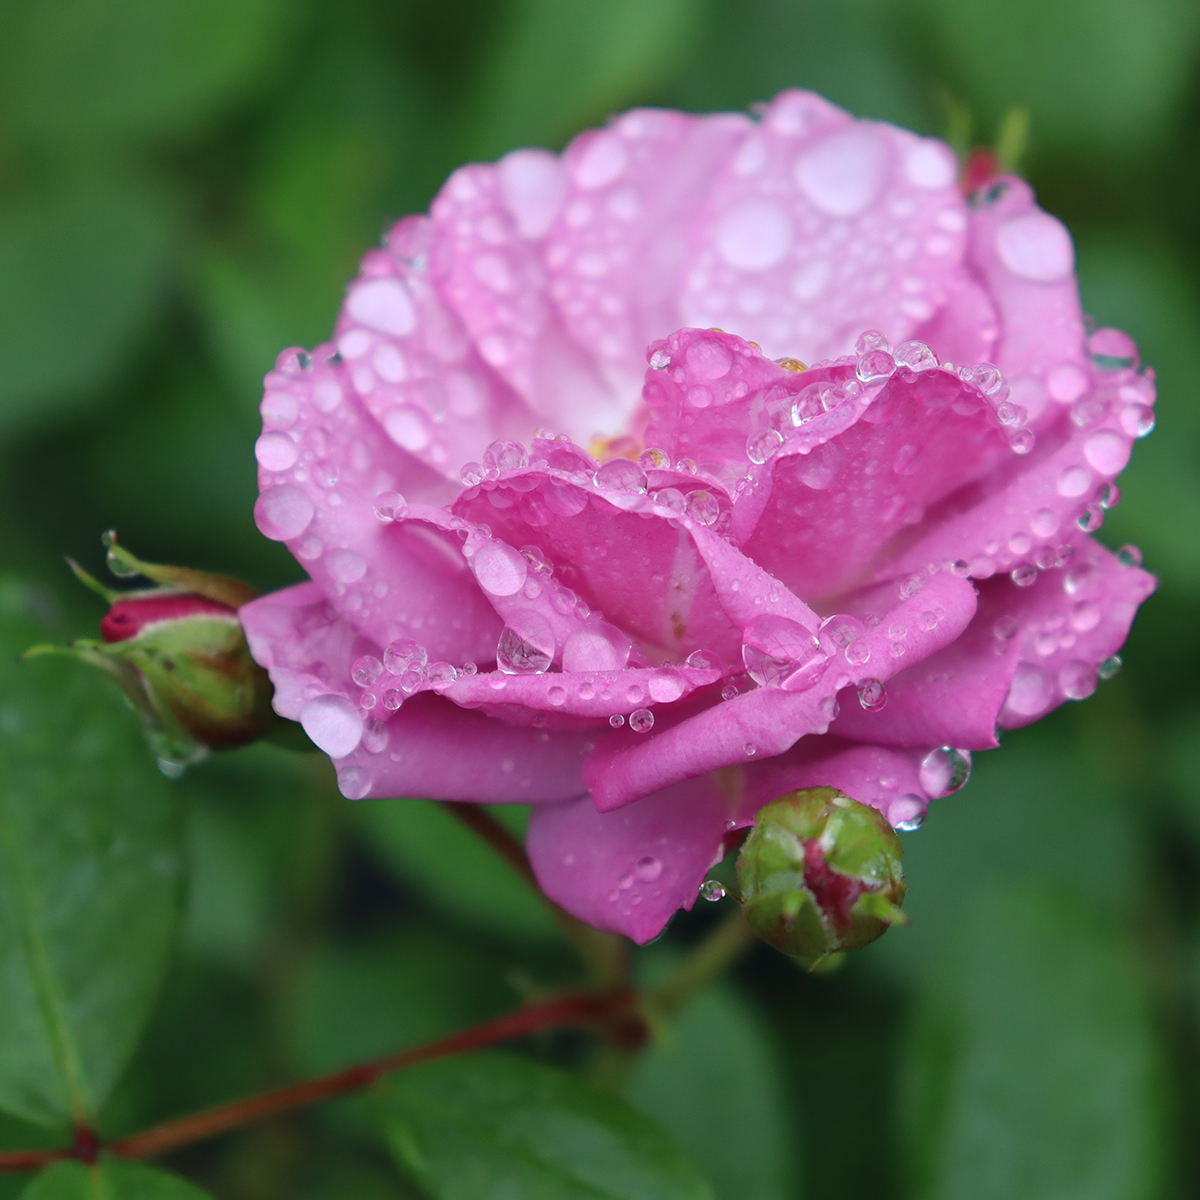 A single bloom of Rise Up Lilac Days rose delicately covered in raindrops. 